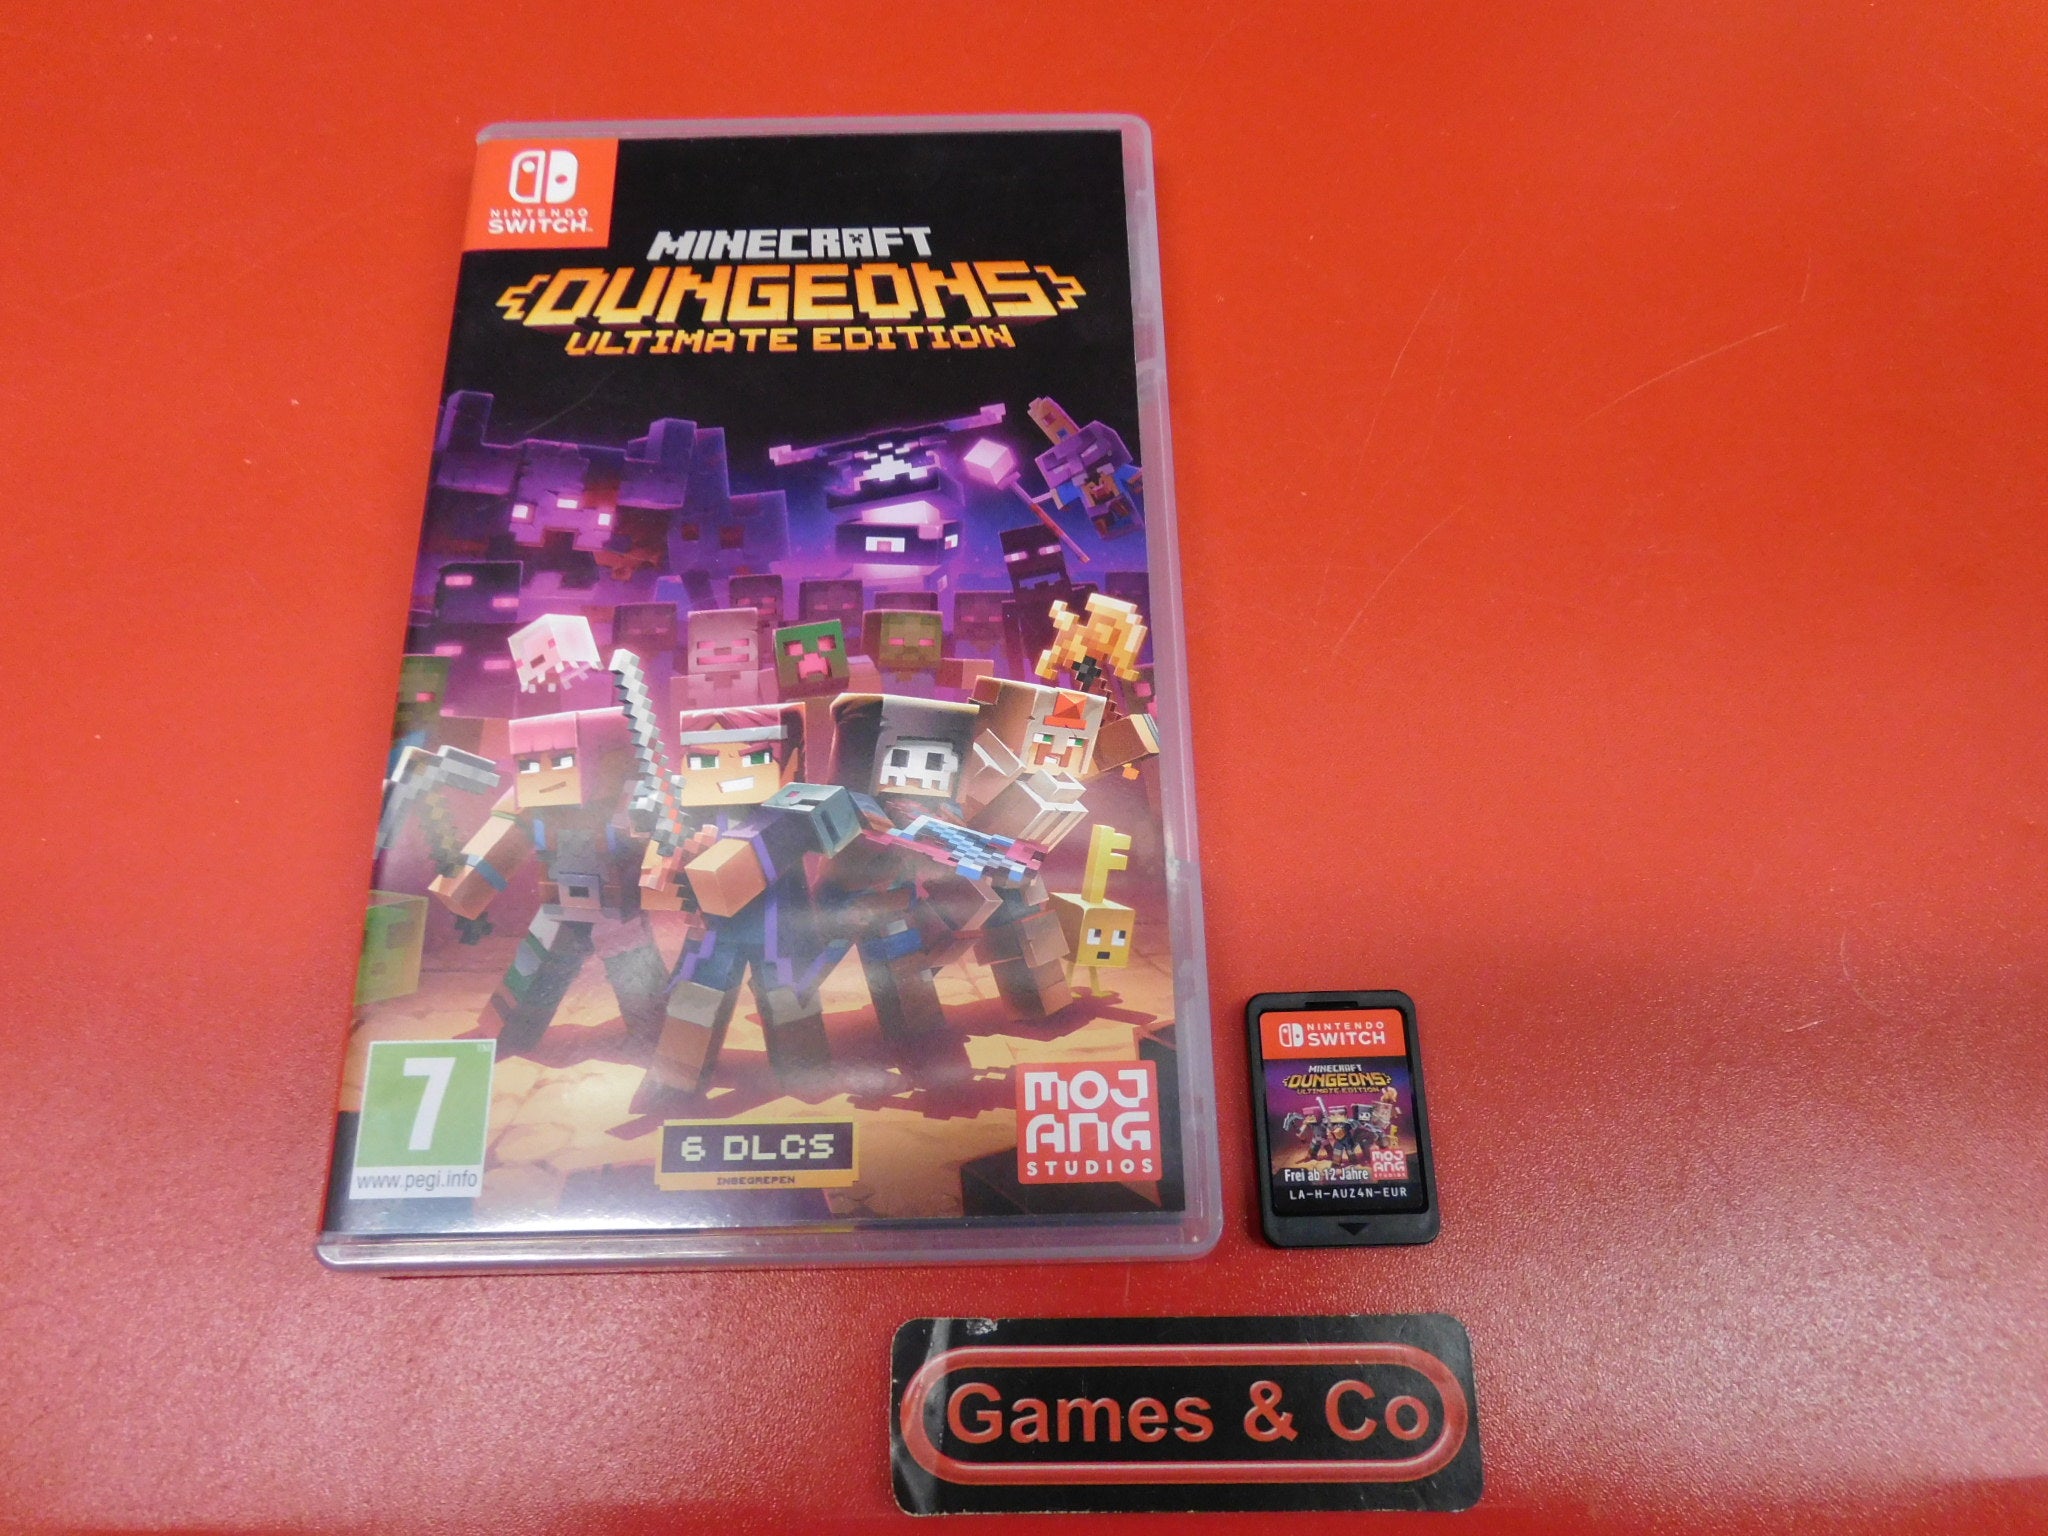 Minecraft Dungeons Ultimate Edition for Nintendo Switch - Nintendo